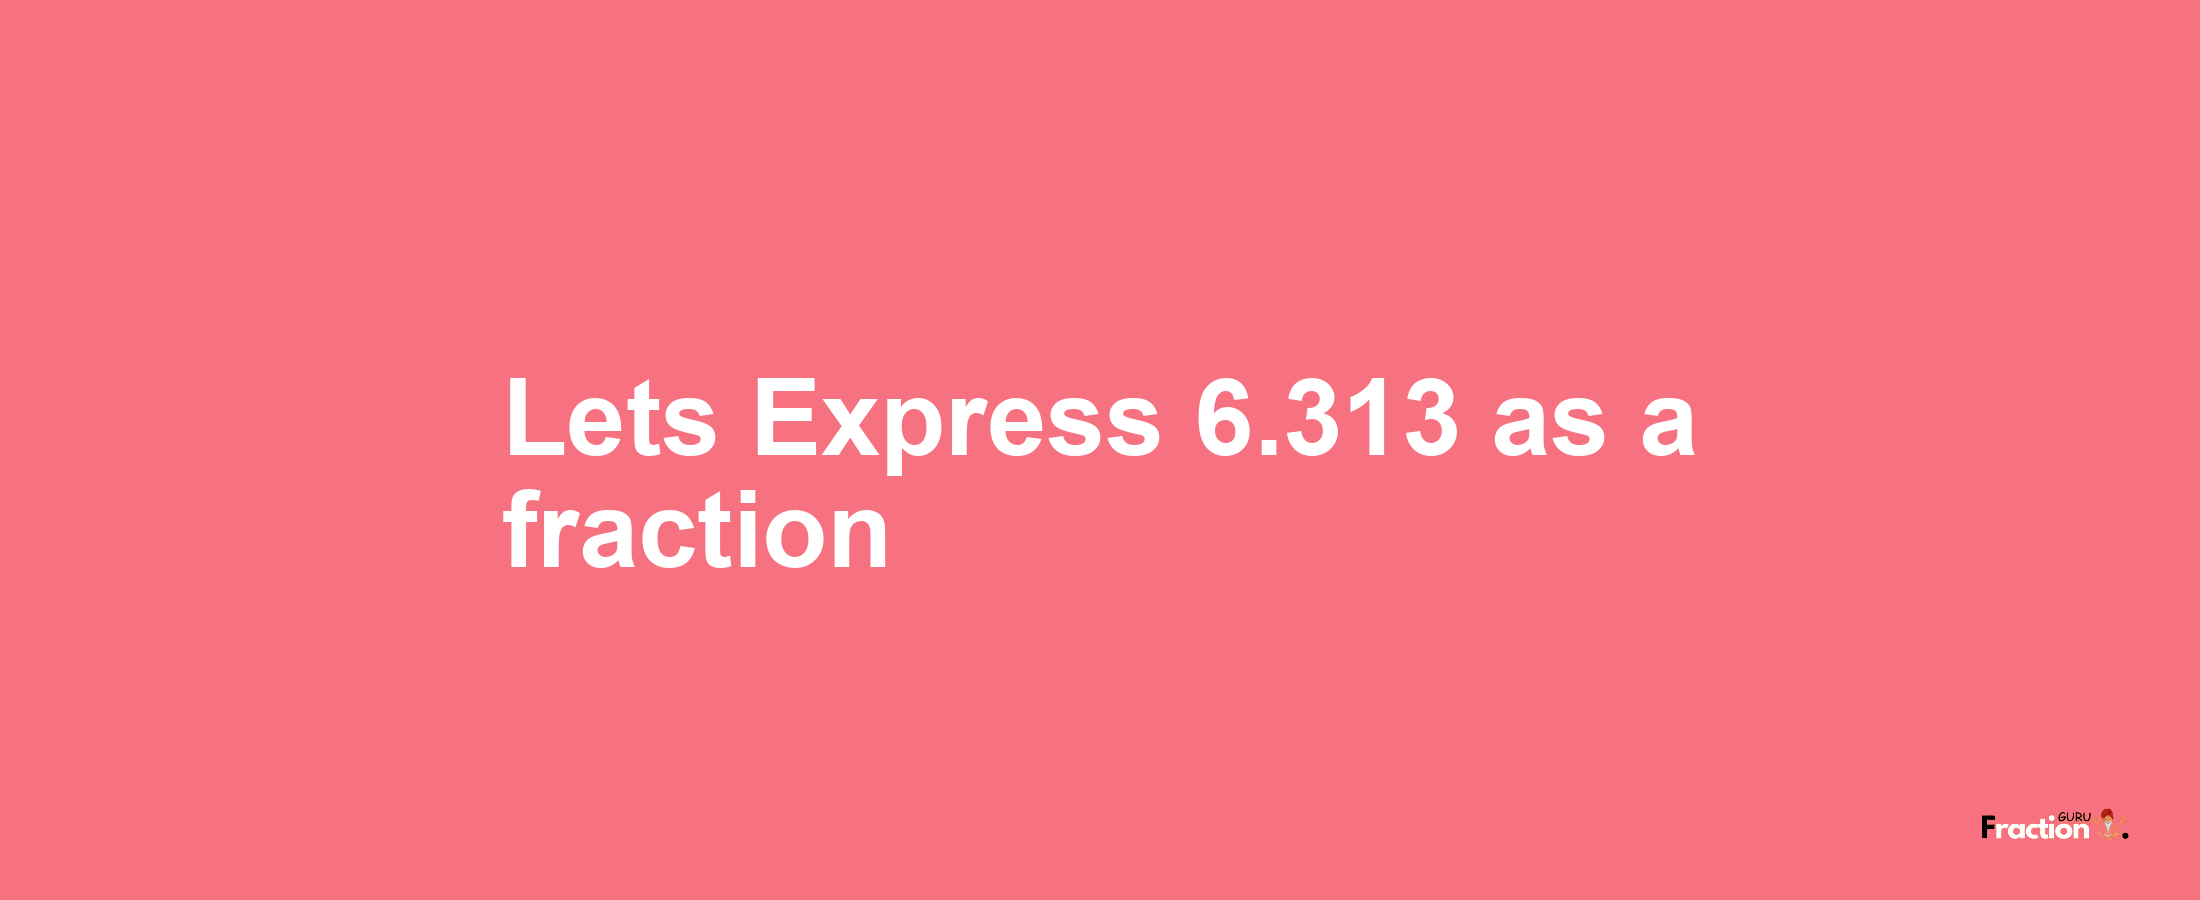 Lets Express 6.313 as afraction